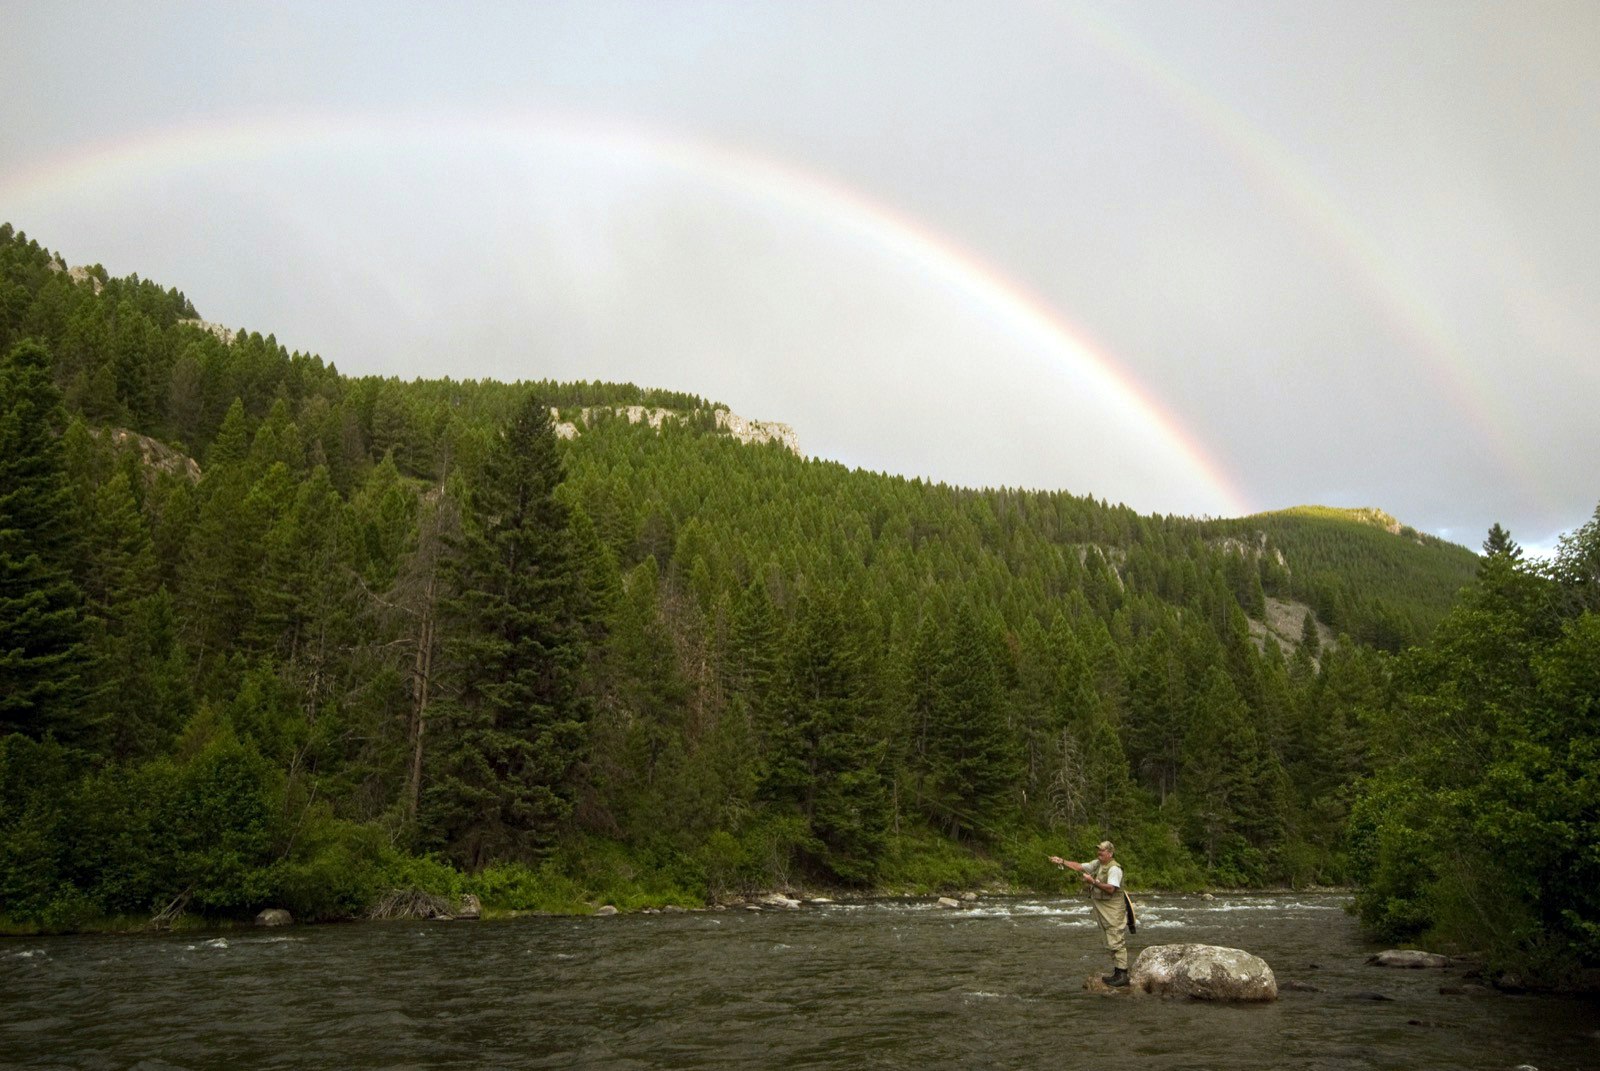 A rainbow arcs over an angler as he fly fishes on a river in Montana; World's best rivers for fly fishing